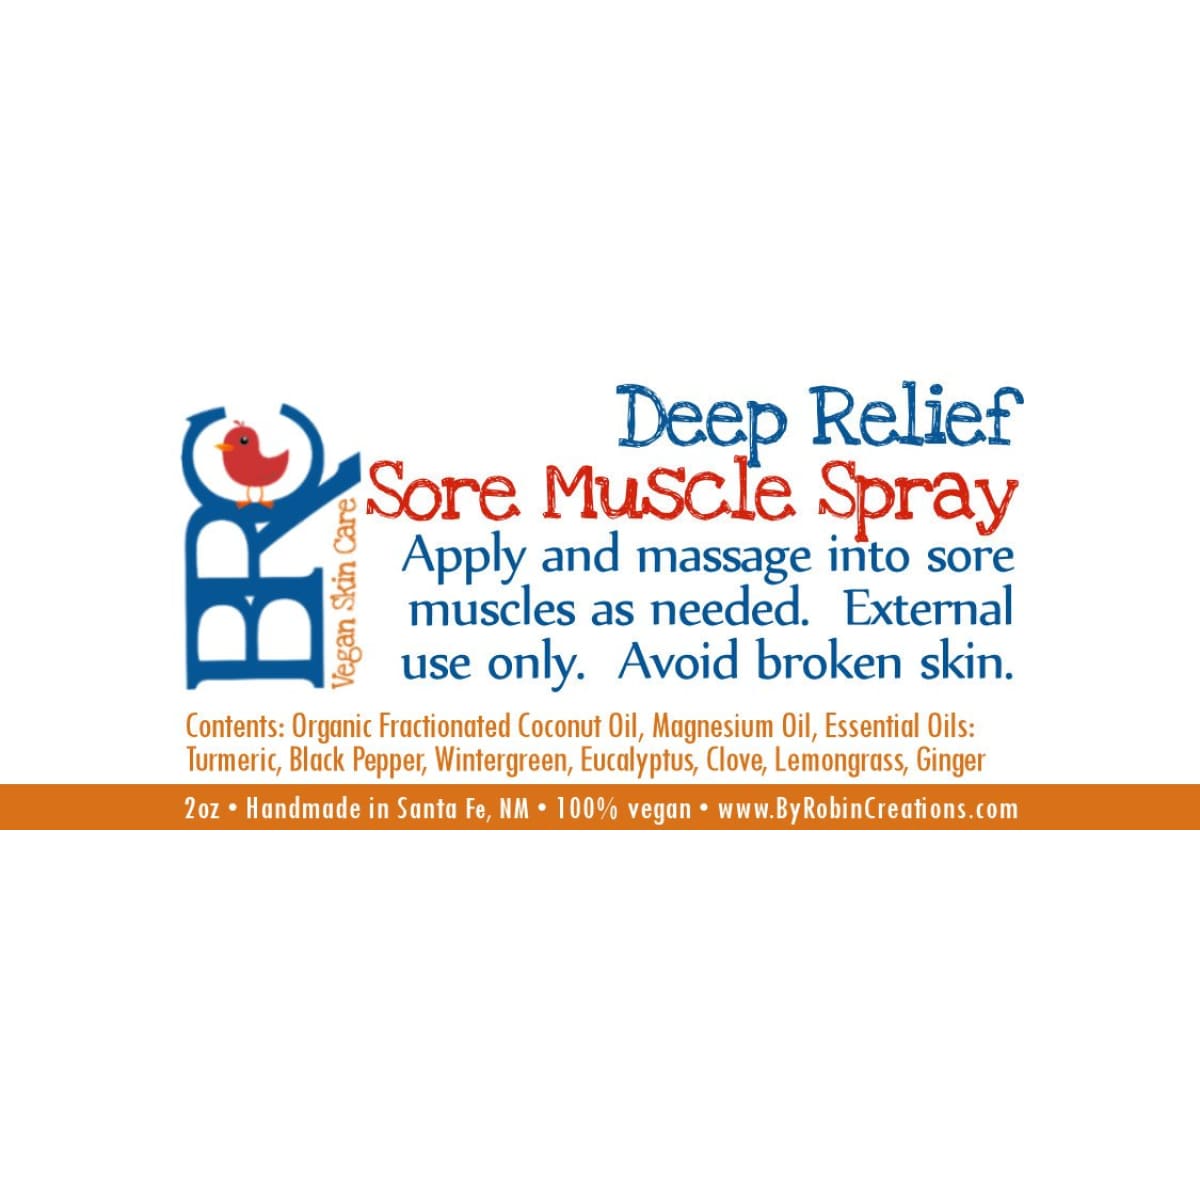 LAST CHANCE! Deep Relief Sore Muscle Spray | By Robin Creations 